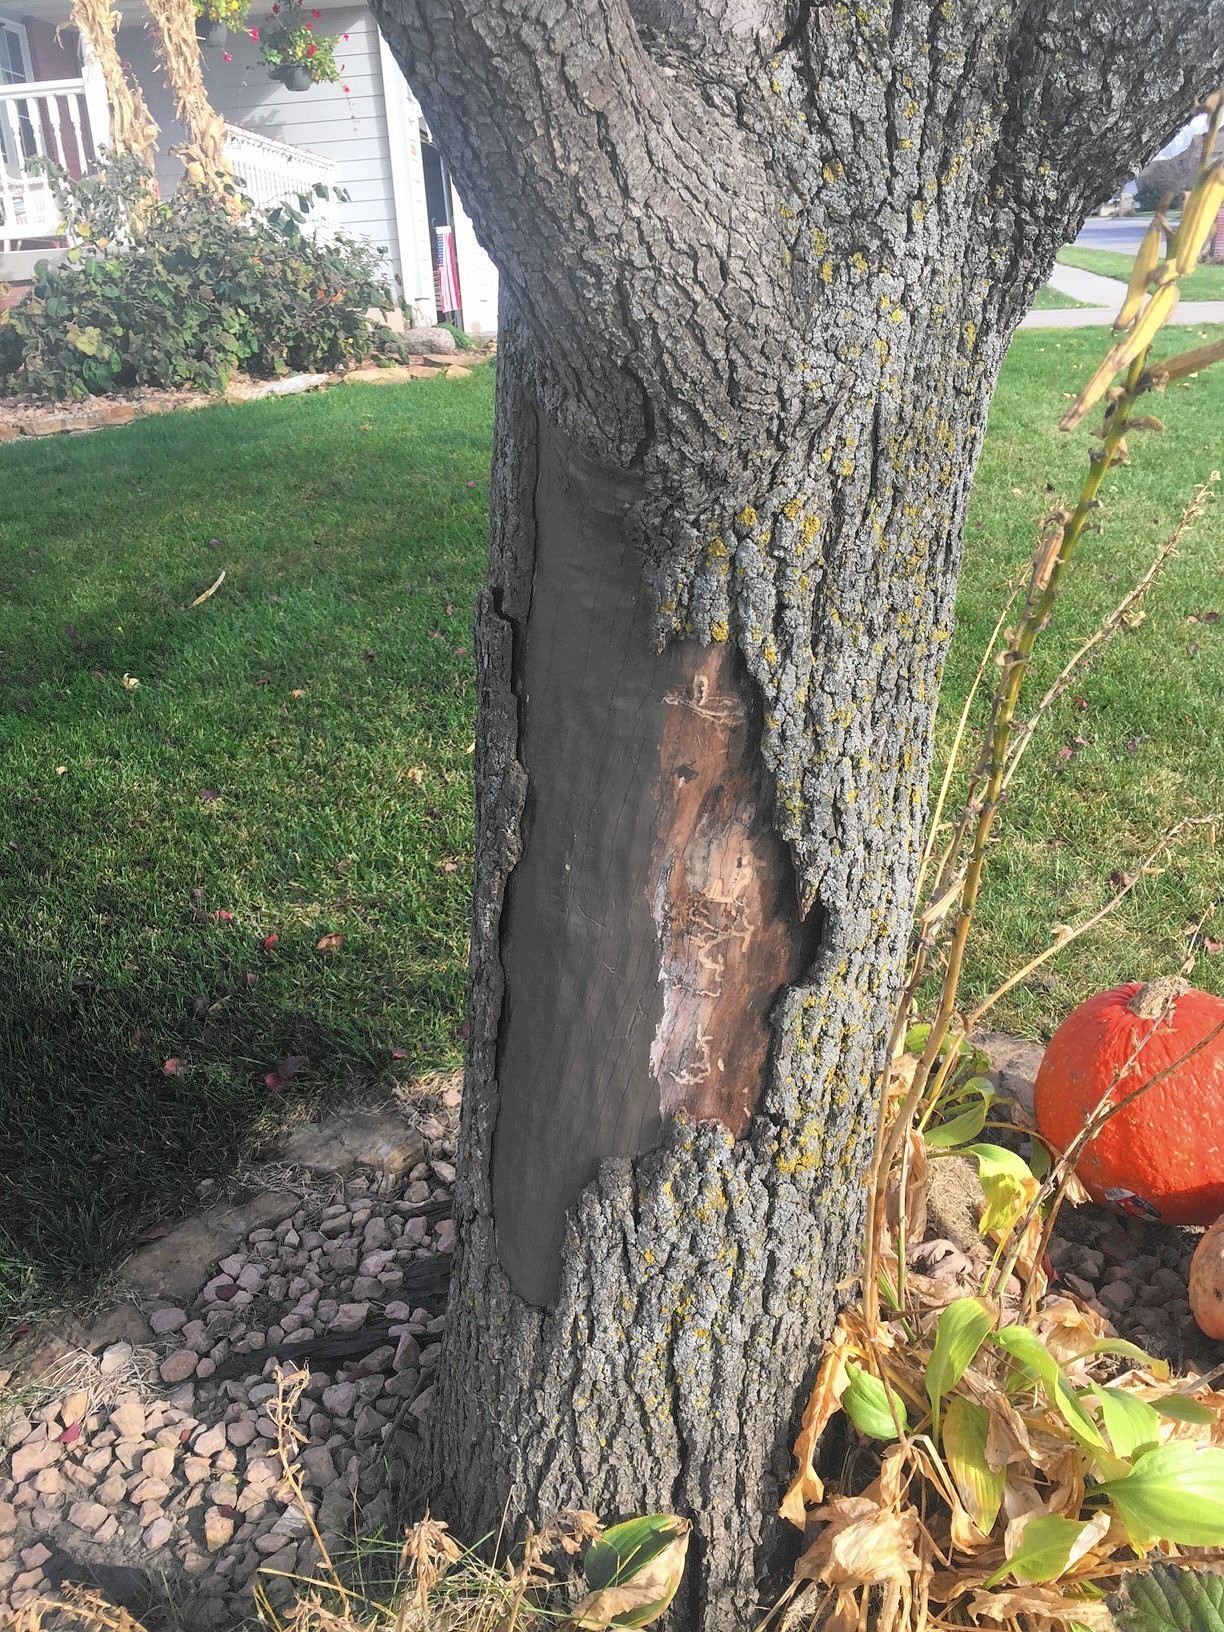 Ailing pear tree? Could be a canker, fire blight - Chicago Tribune